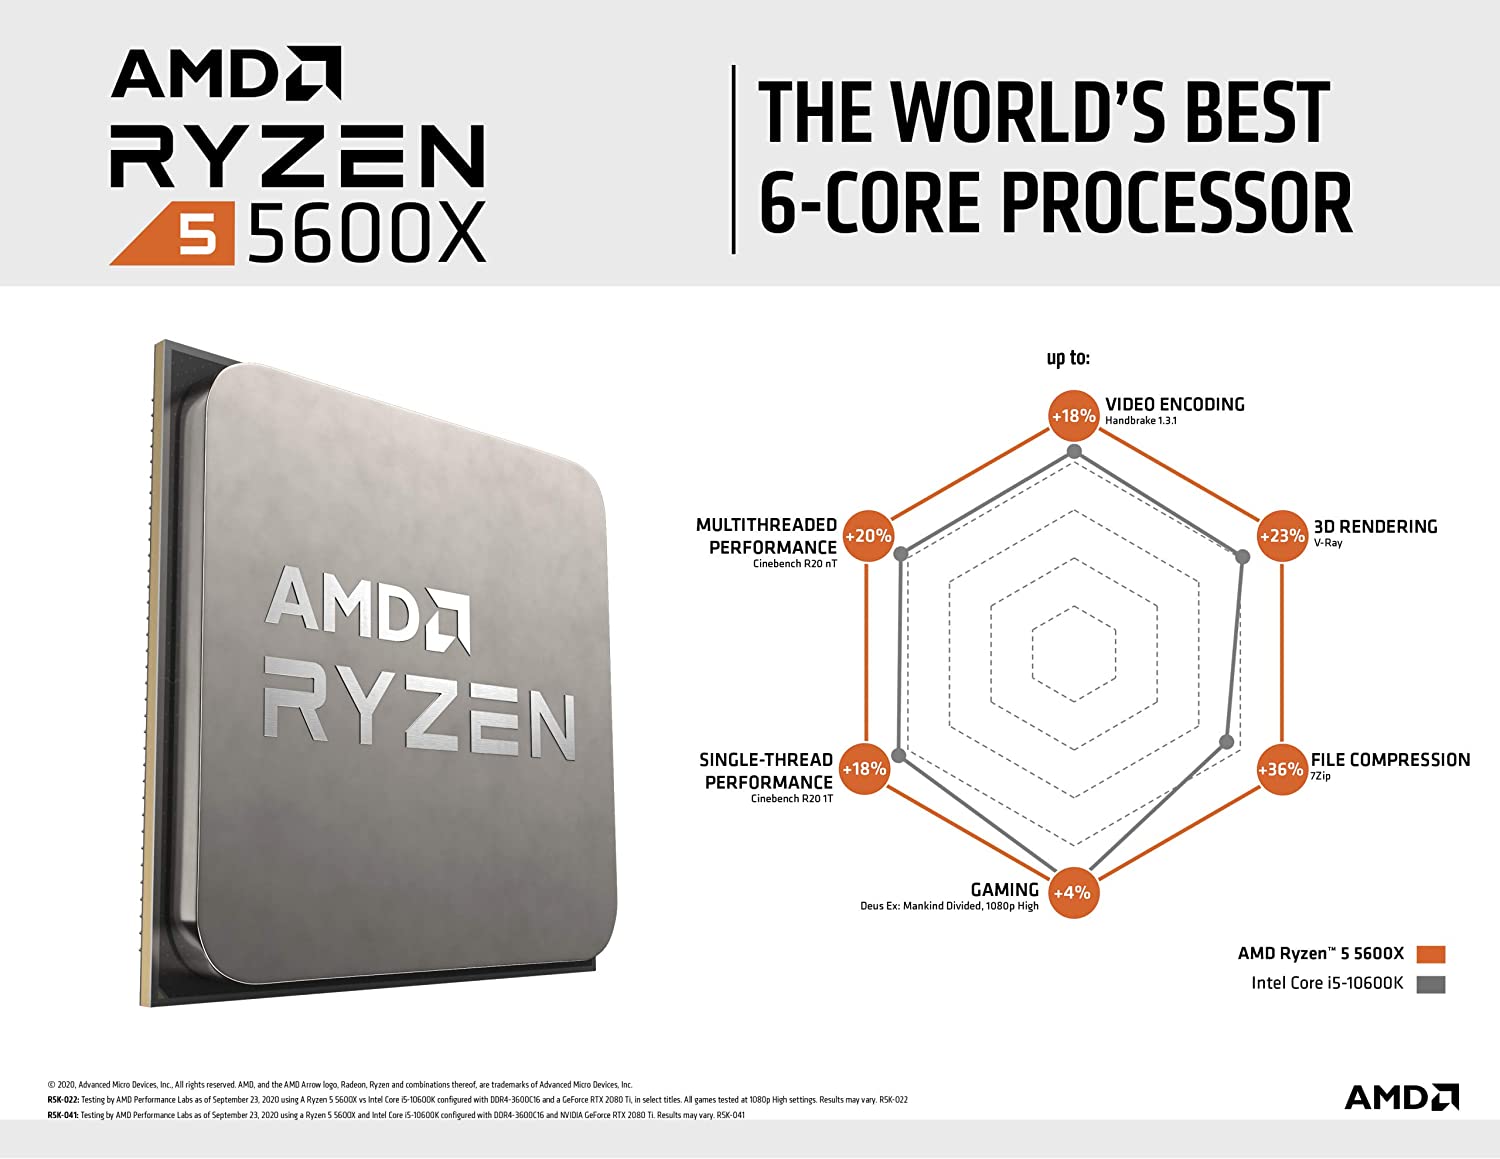 AMD Ryzen 5 5600X Processor (6C/12T, 35MB Cache, up to 4.6 GHz Max